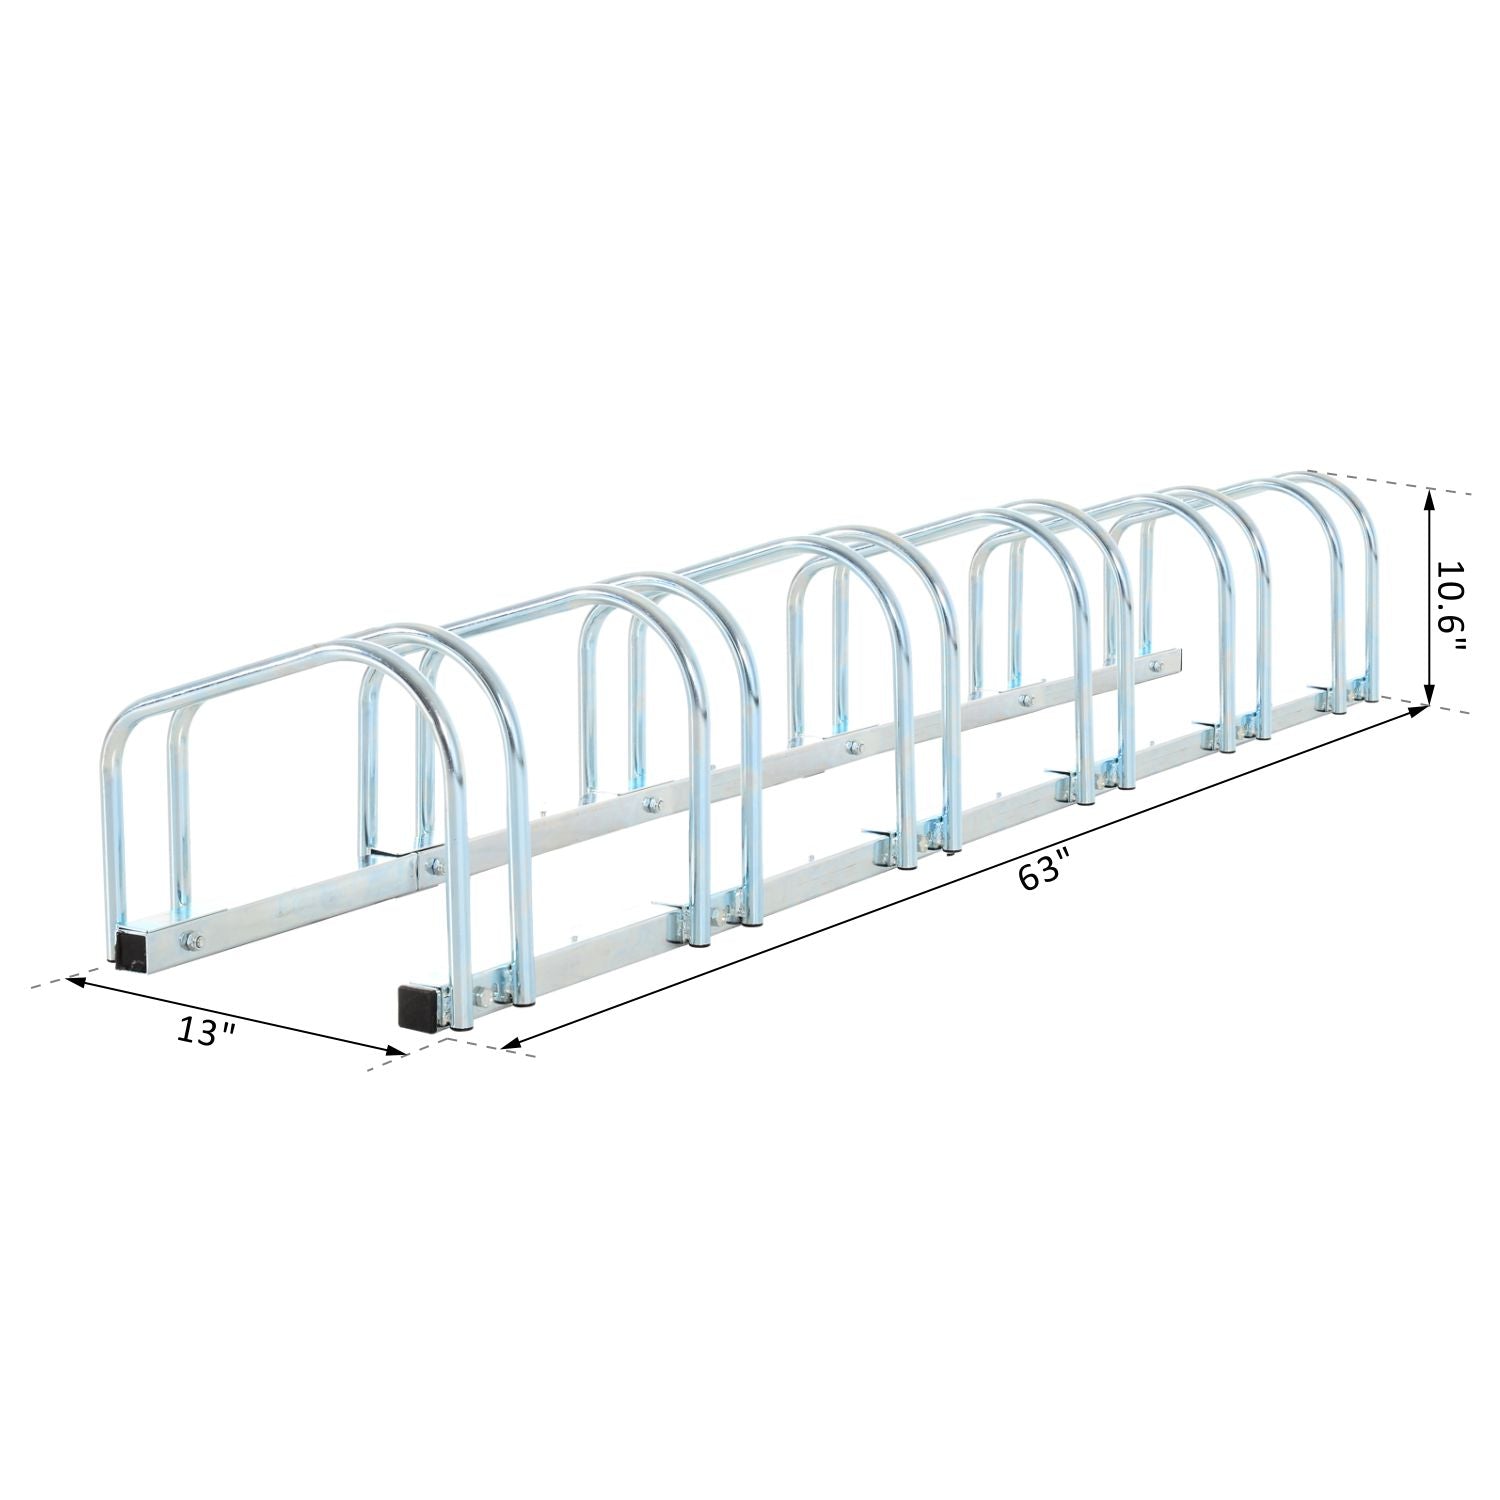 6-Bike Bicycle Floor Parking Rack Cycling Storage Stand Ground Mount Garage Organizer for Indoor and Outdoor Use at Gallery Canada